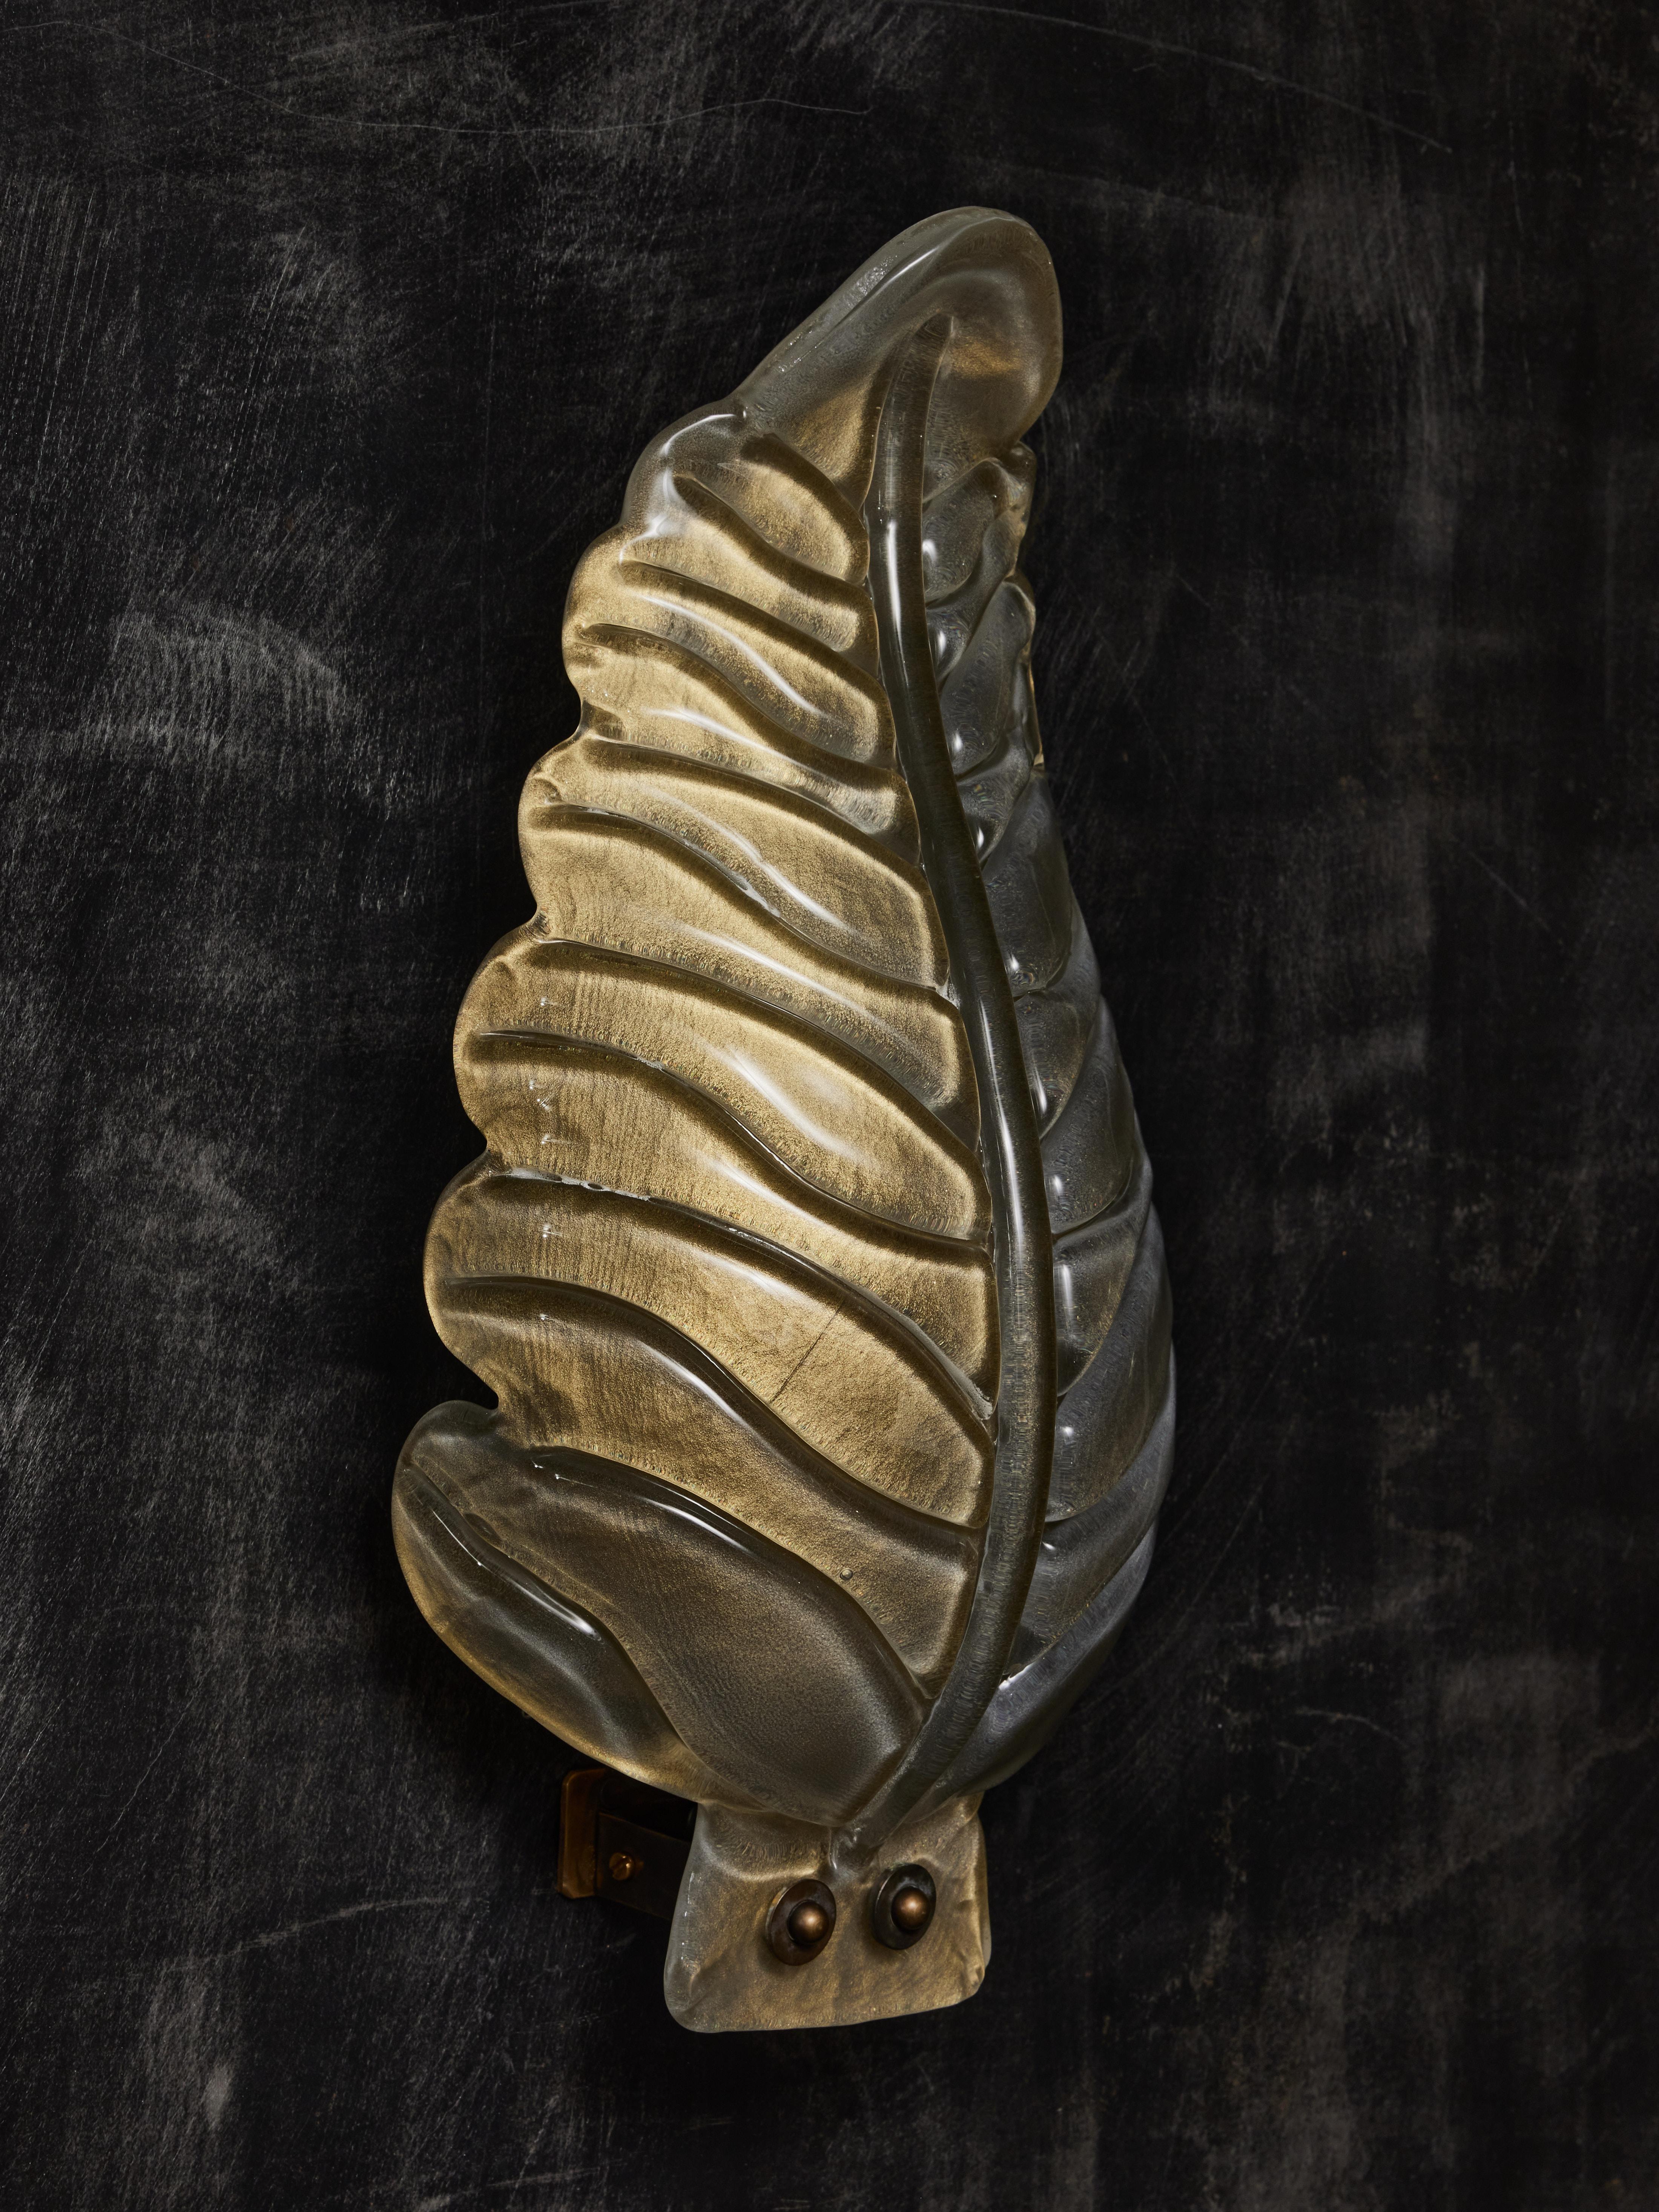 Modern Leaves Shaped Murano Glass Wall Sconces For Sale